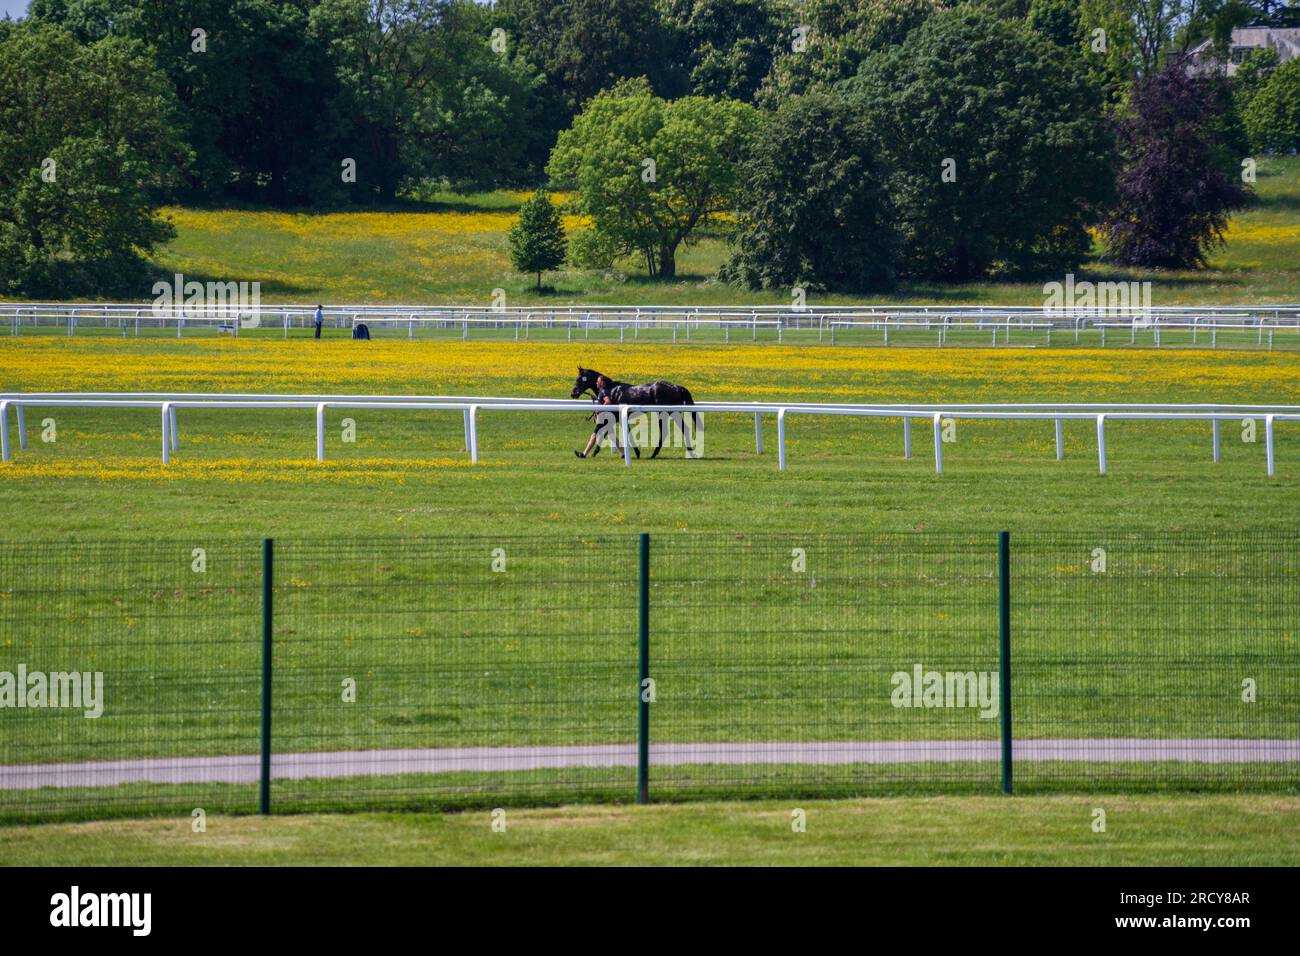 Person walks a race horse in a beautiful meadow after the York horse race. The horse race is a traditional event and part of the English culture. Stock Photo